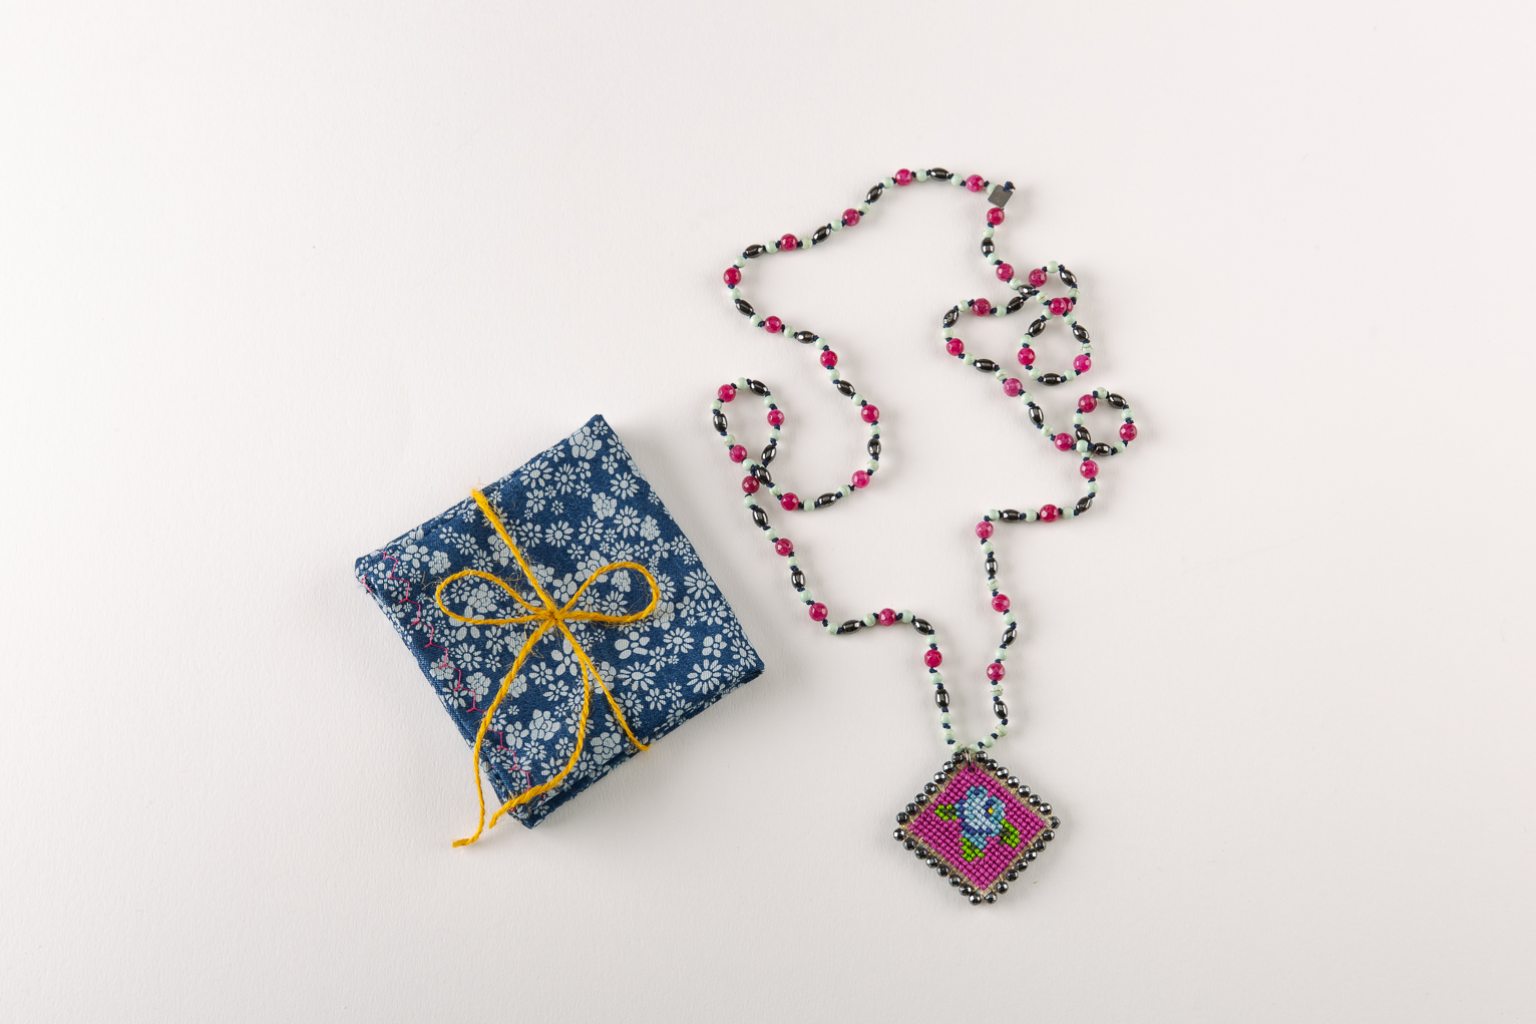 Burgundy rosary necklace with hand-stitched rose